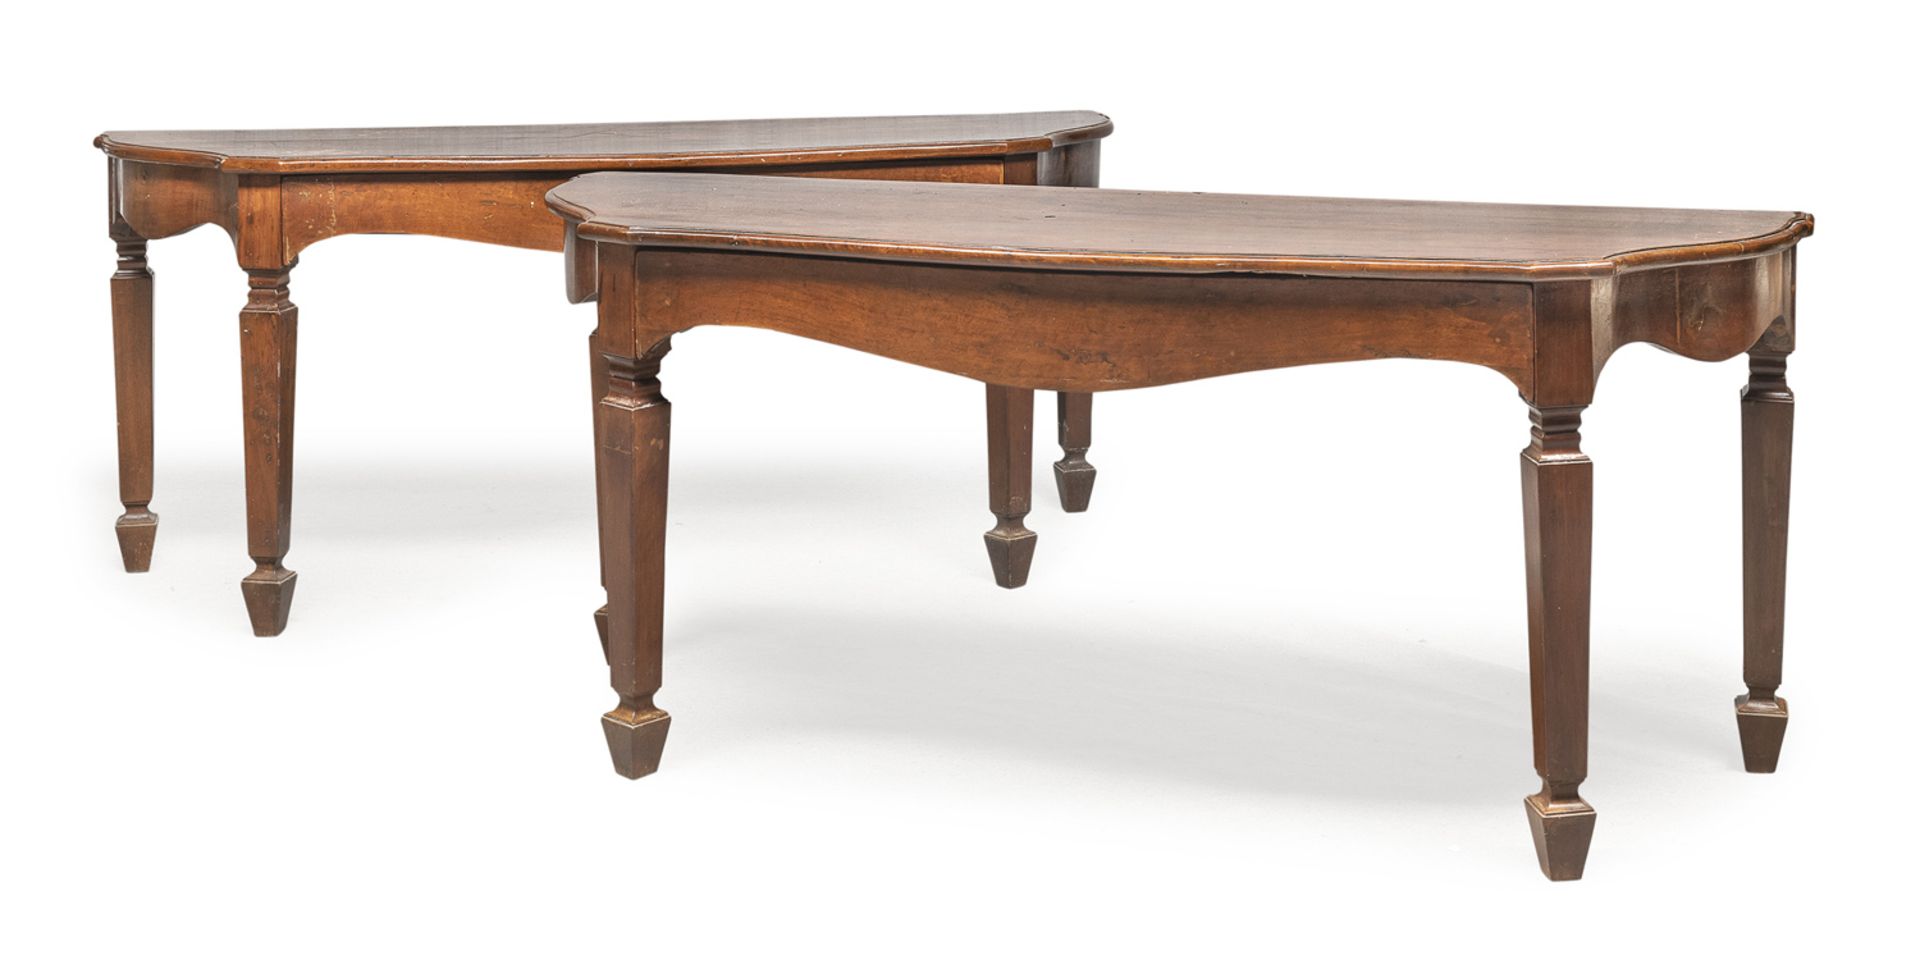 WALNUT TABLE DIVISIBLE IN TWO CONSOLES CENTRAL ITALY LATE 18th CENTURY